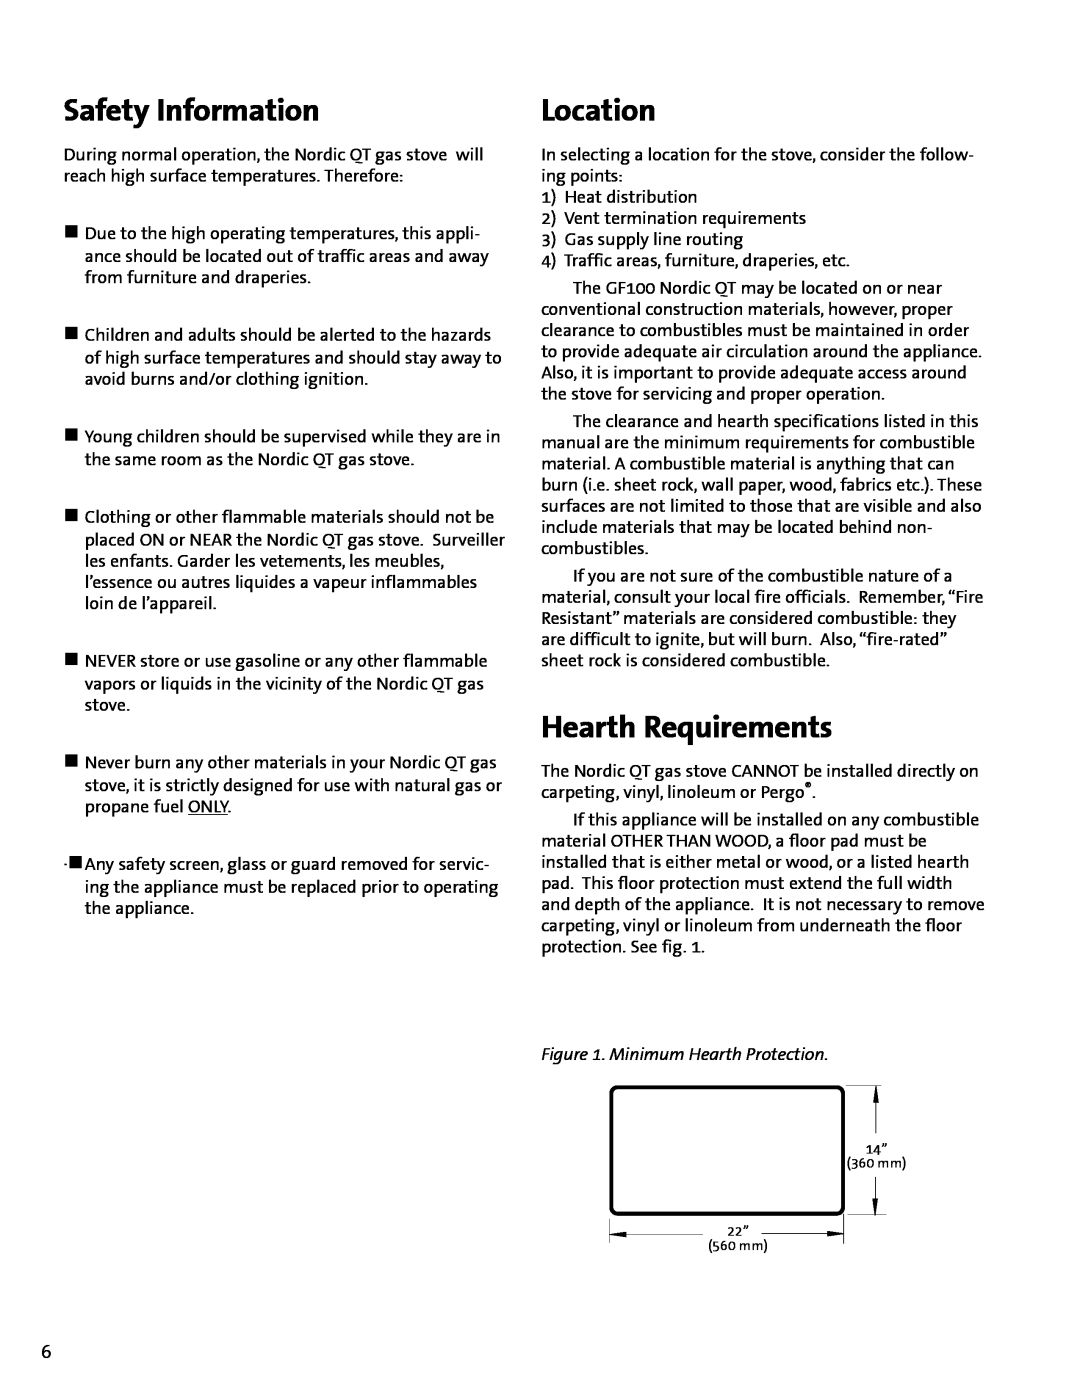 Jotul GF100 DV manual Safety Information, Location, Hearth Requirements, Minimum Hearth Protection 